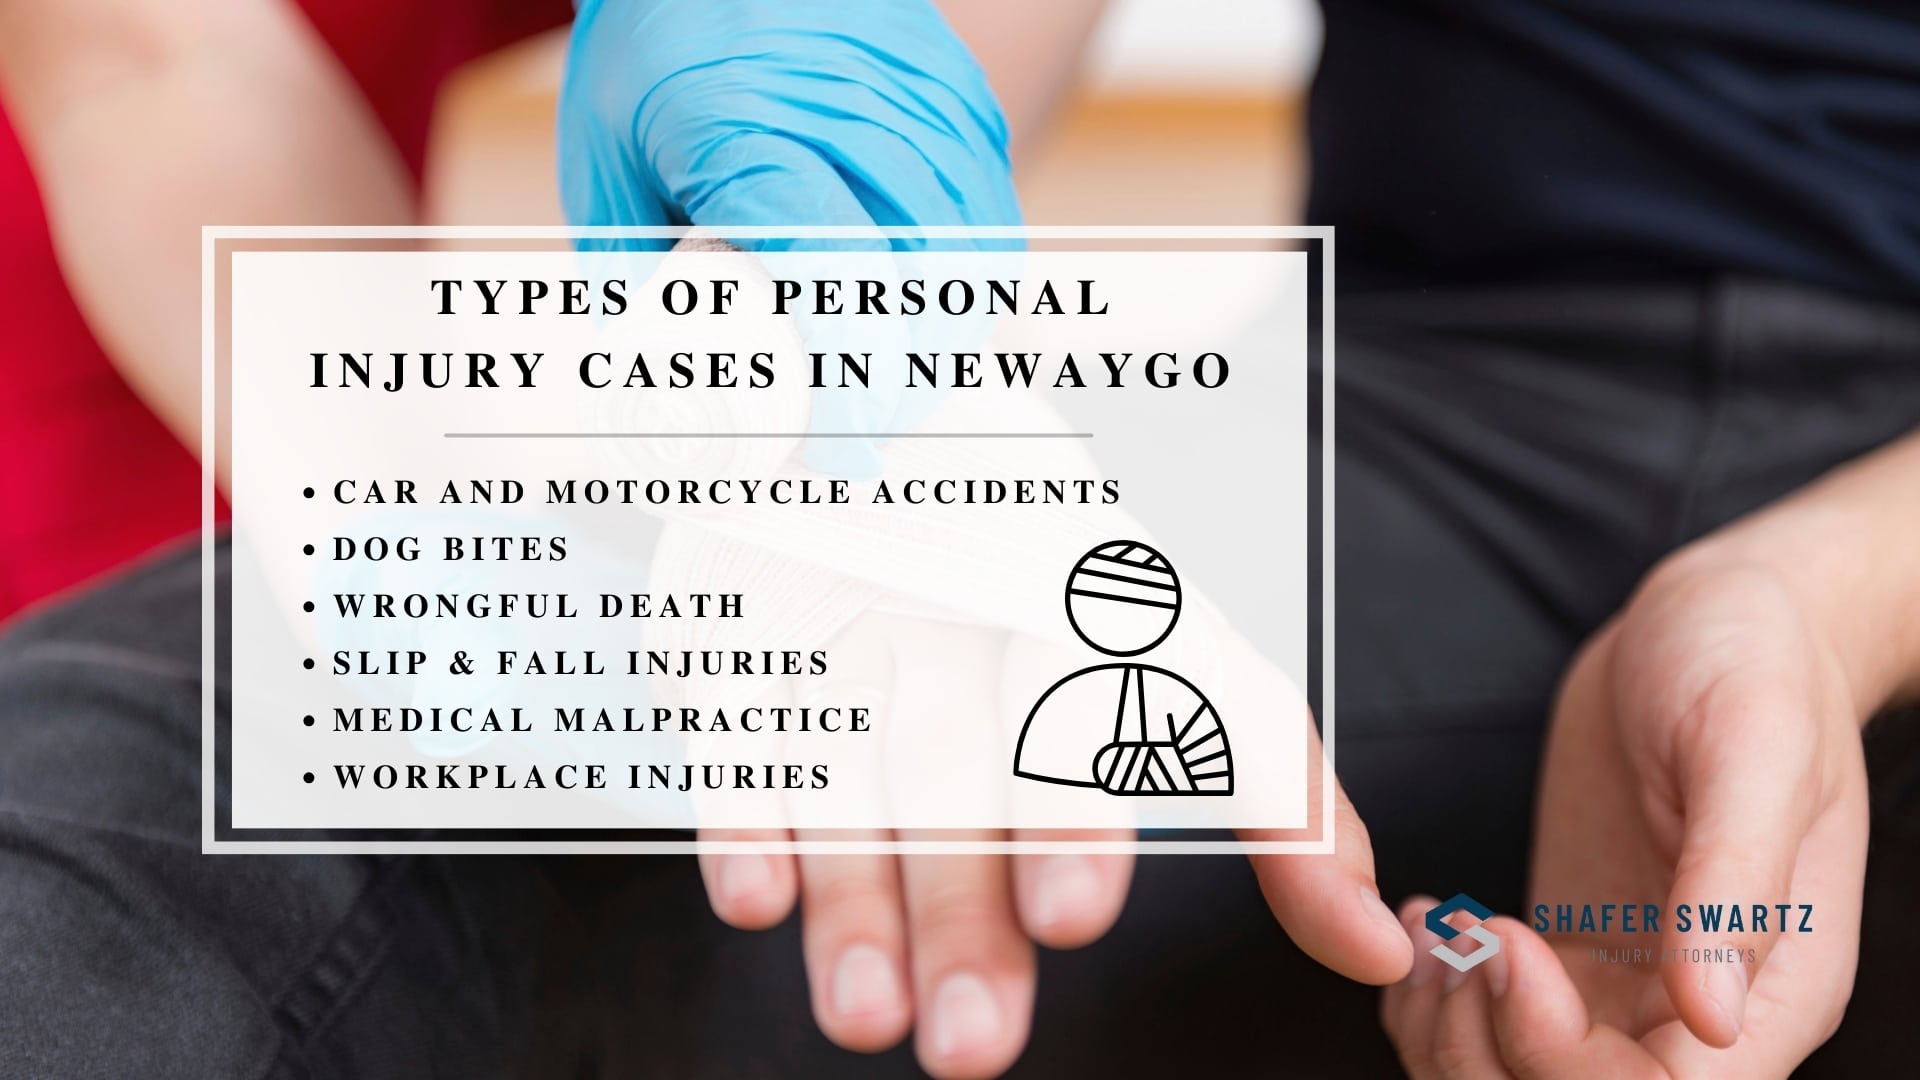 Infographic image of types of personal injury cases in Newaygo